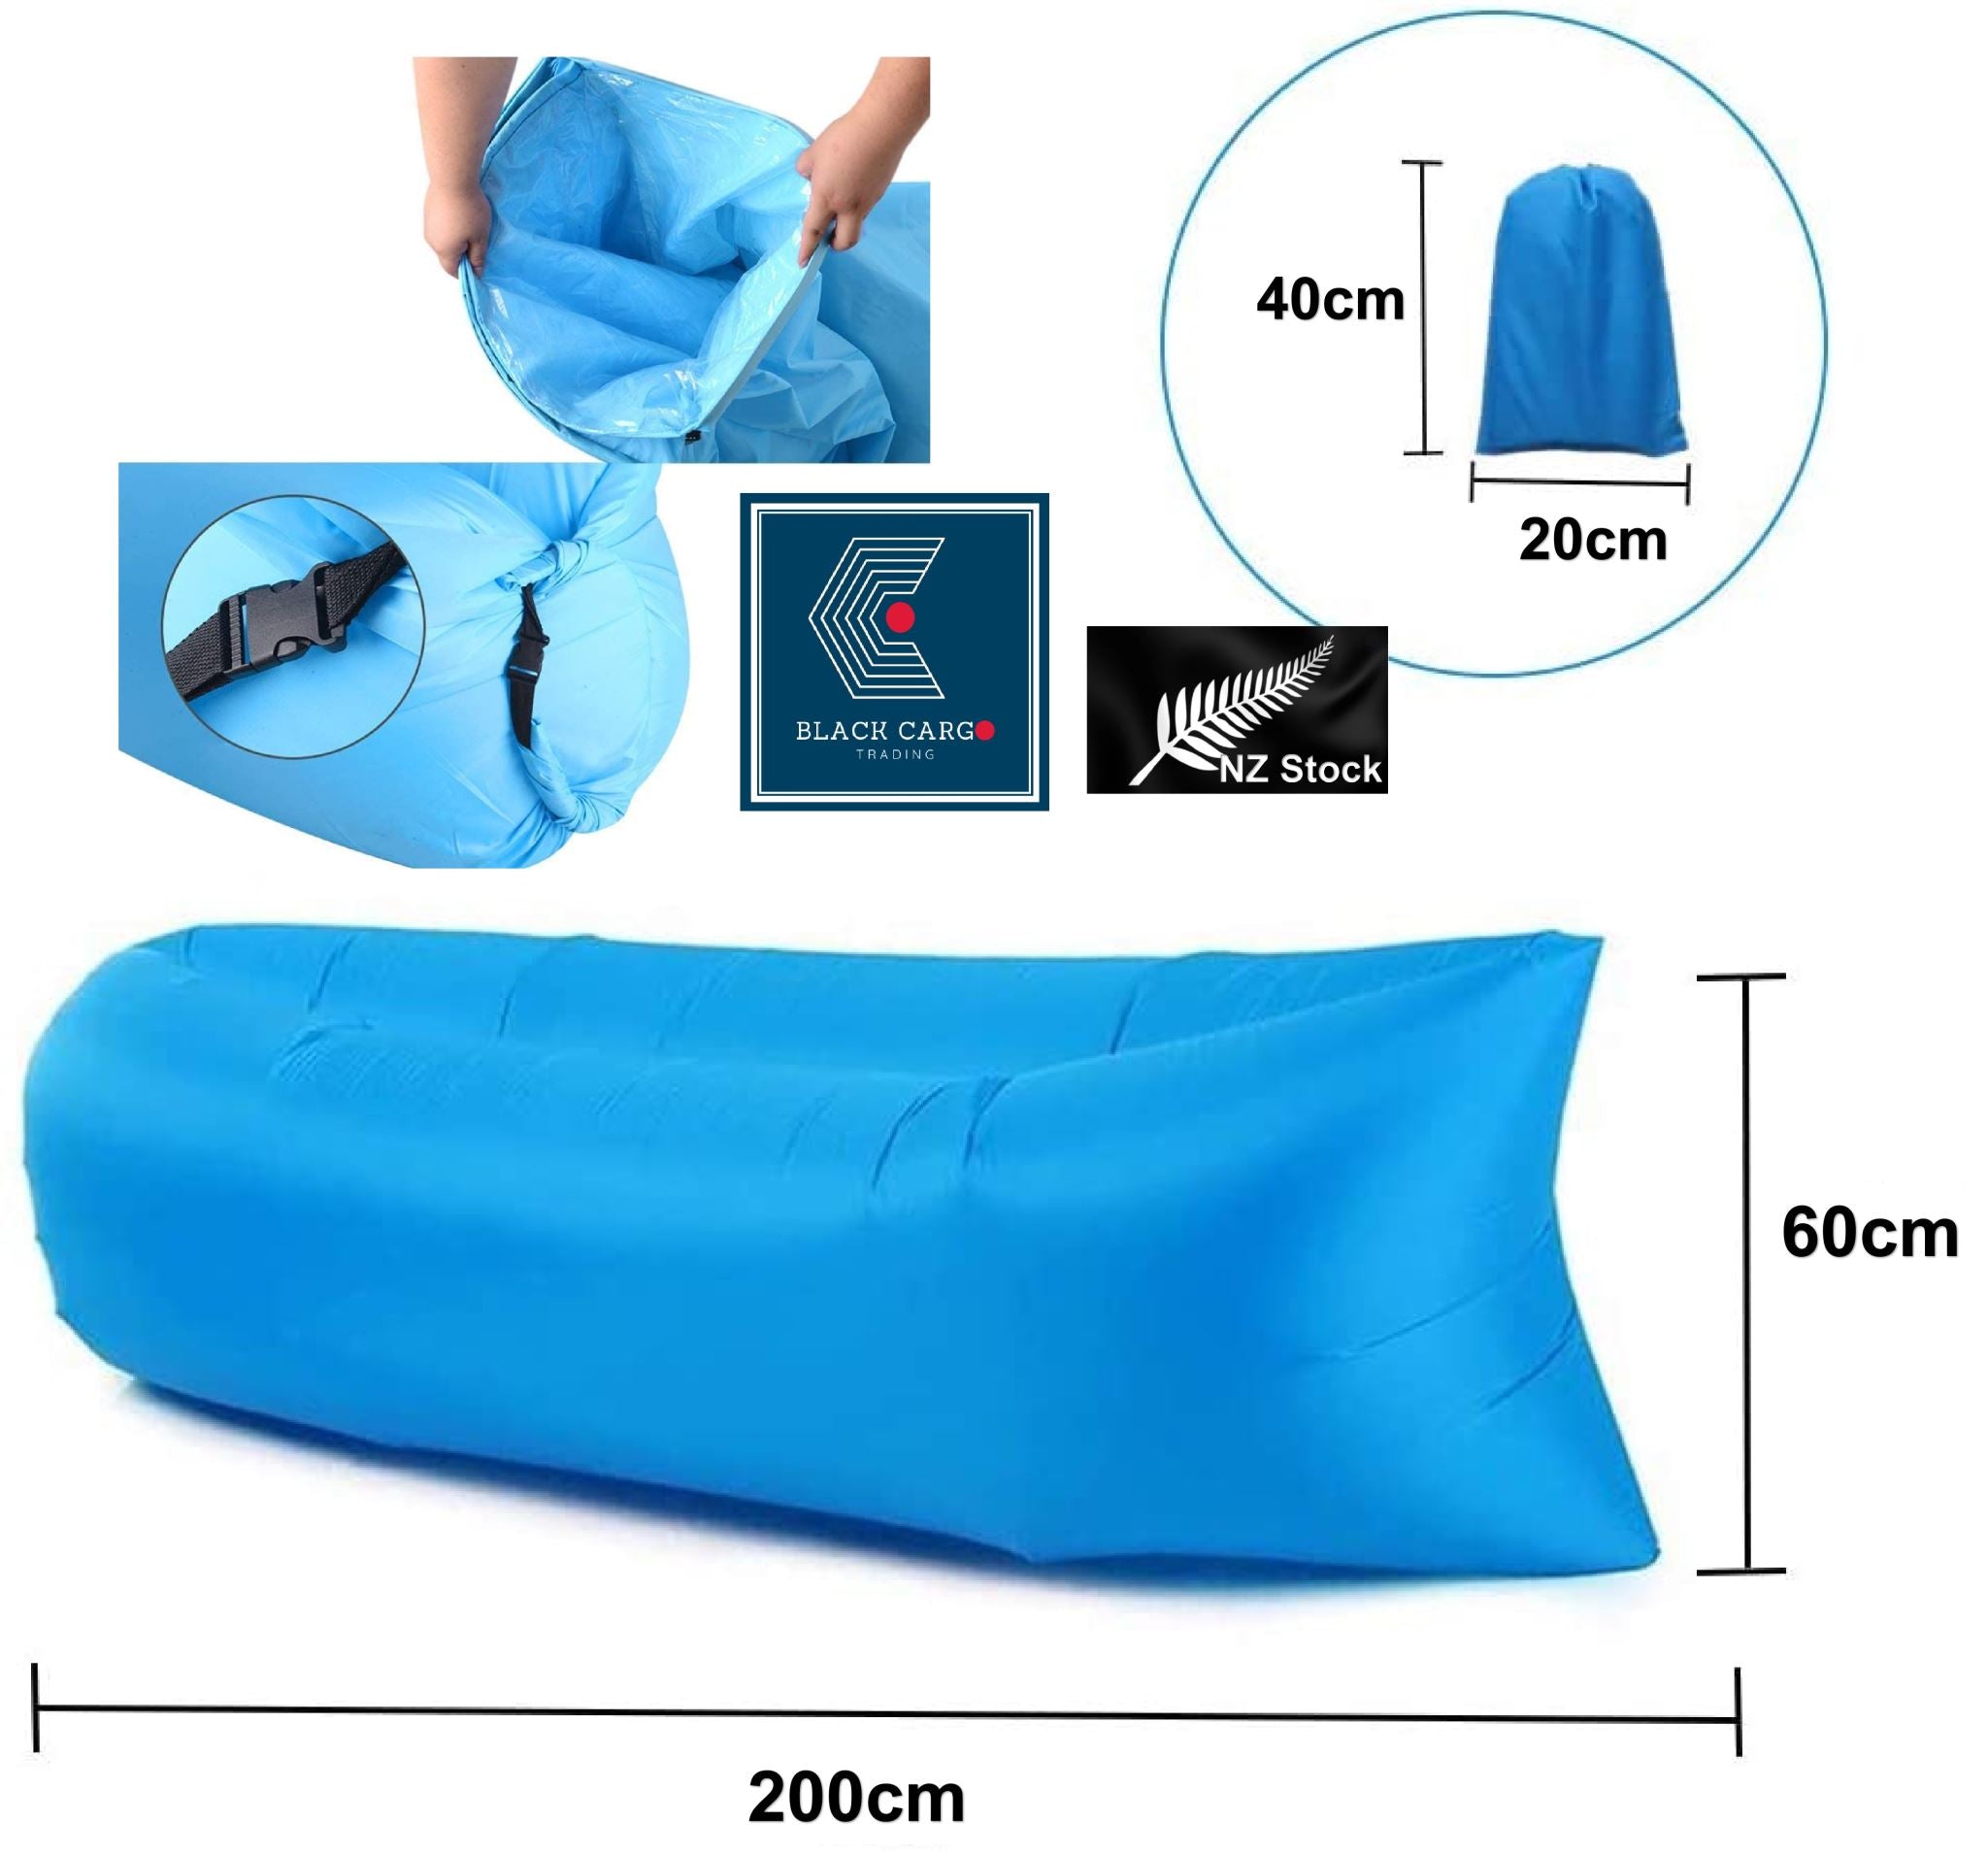 Air Sofa - Portable Inflatable Couch - Referdeal